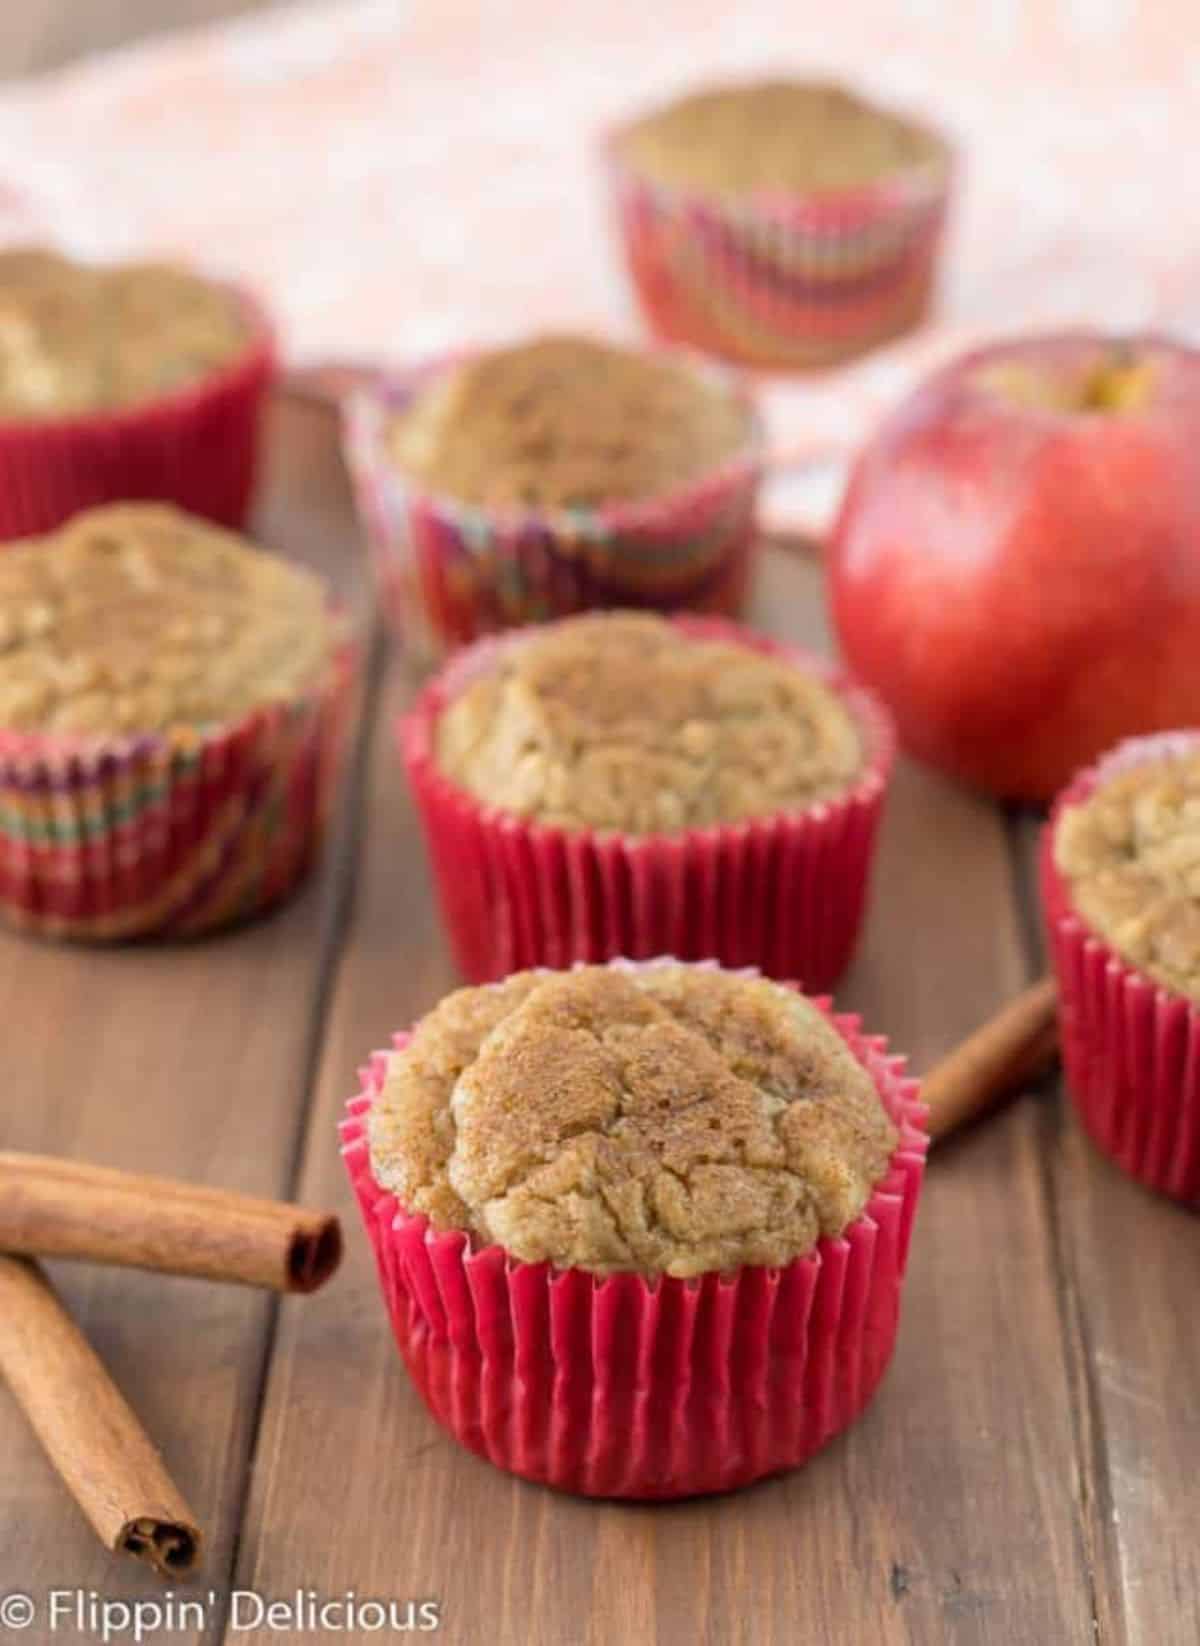 Mouth-watering Gluten-Free Apple Muffins with cinnamons sticks on a table.